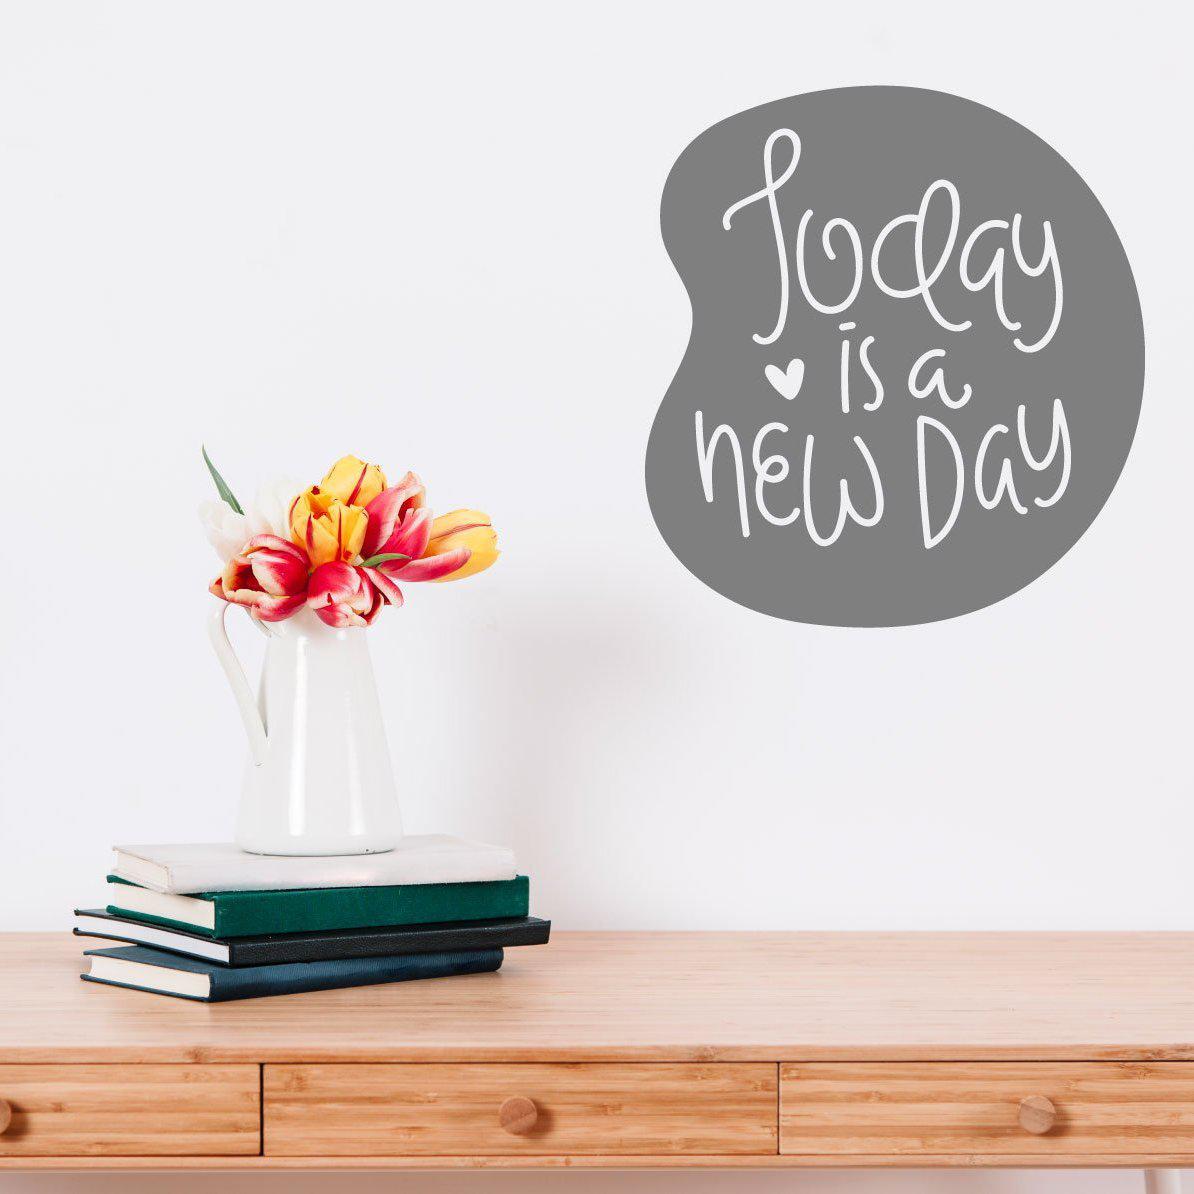 Today Is A New Day Inspirational Wall Sticker Quote